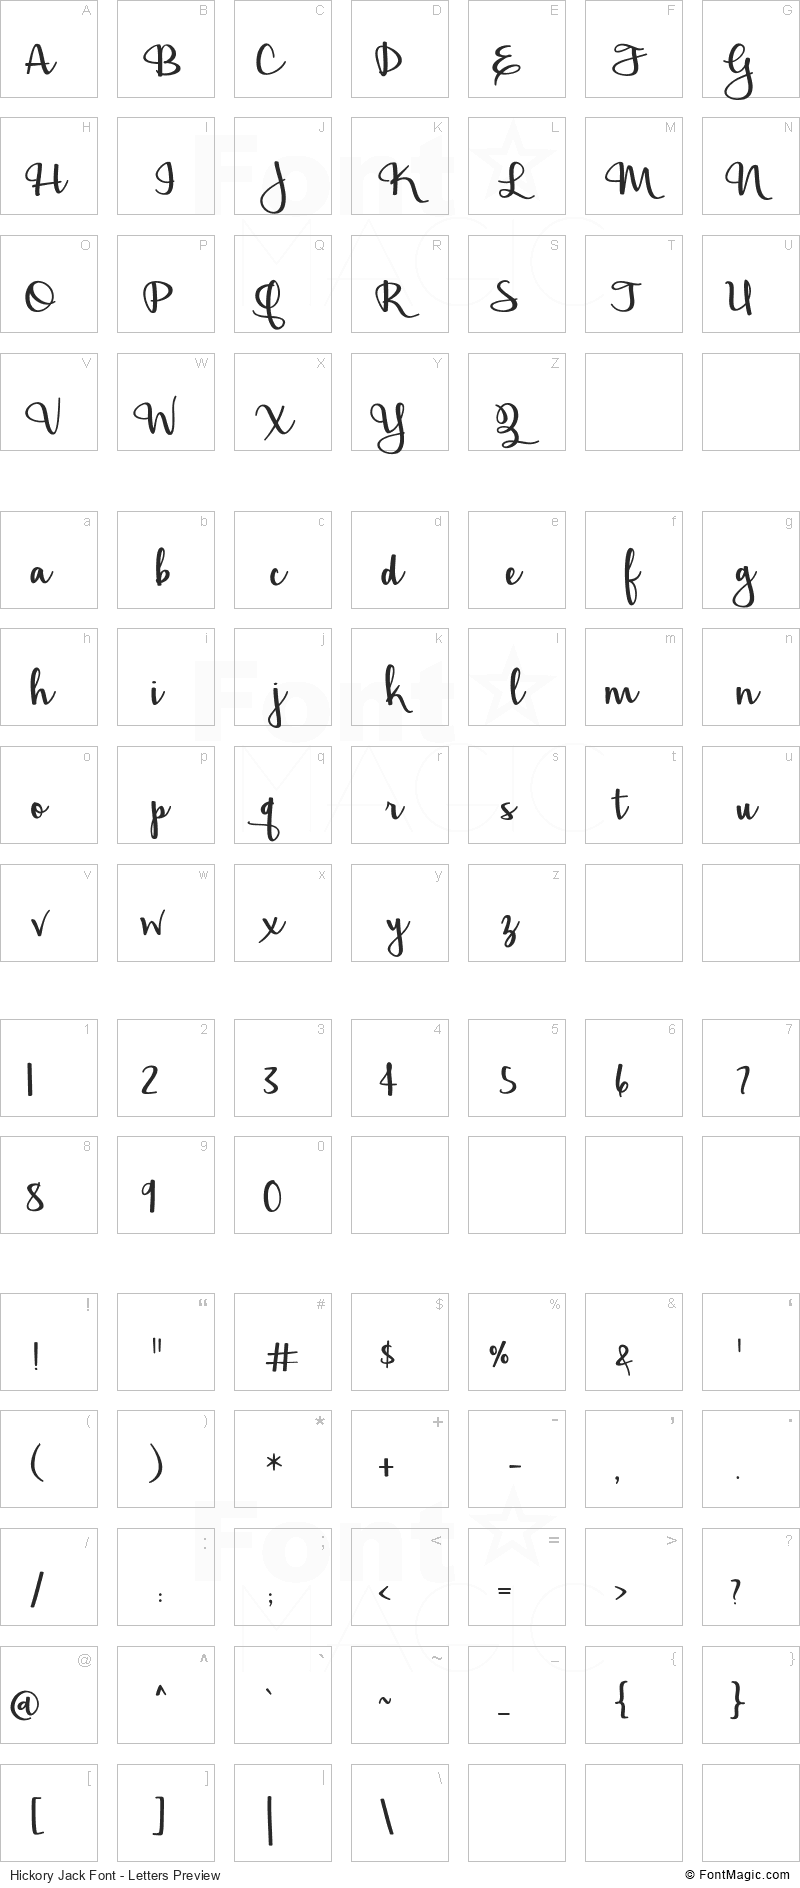 Hickory Jack Font - All Latters Preview Chart